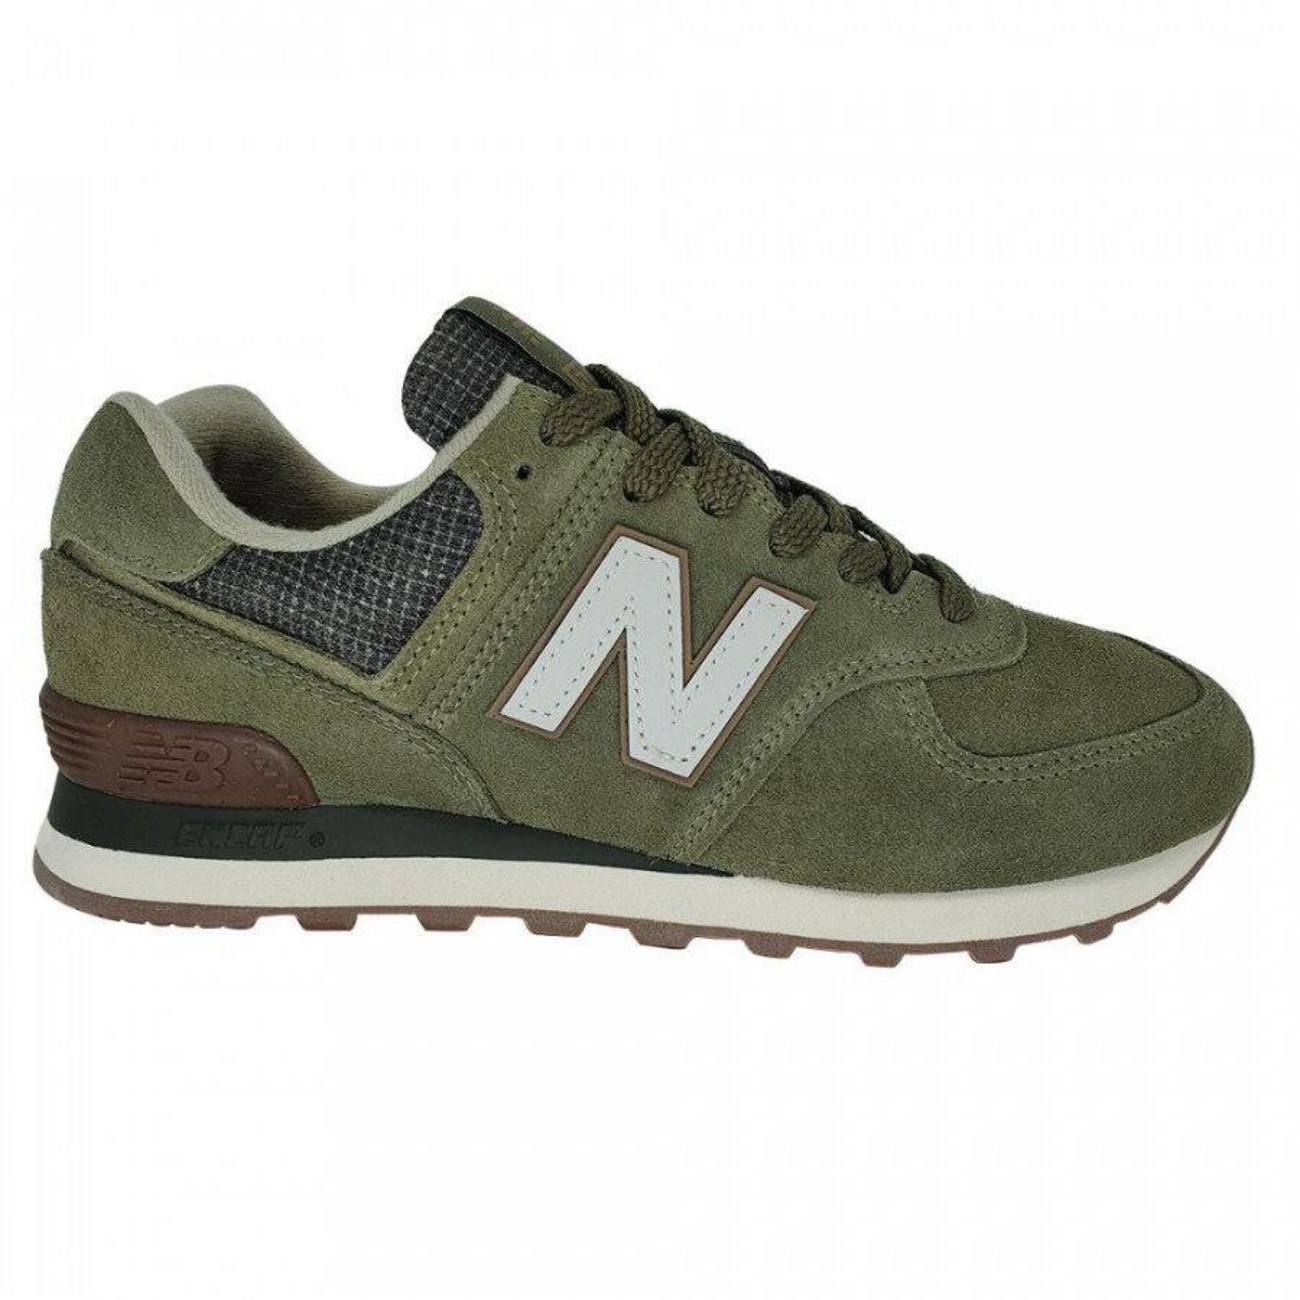 New Balance 574 Masculino Tennis Shoes: The Ultimate Style Statement for Men's Tennis